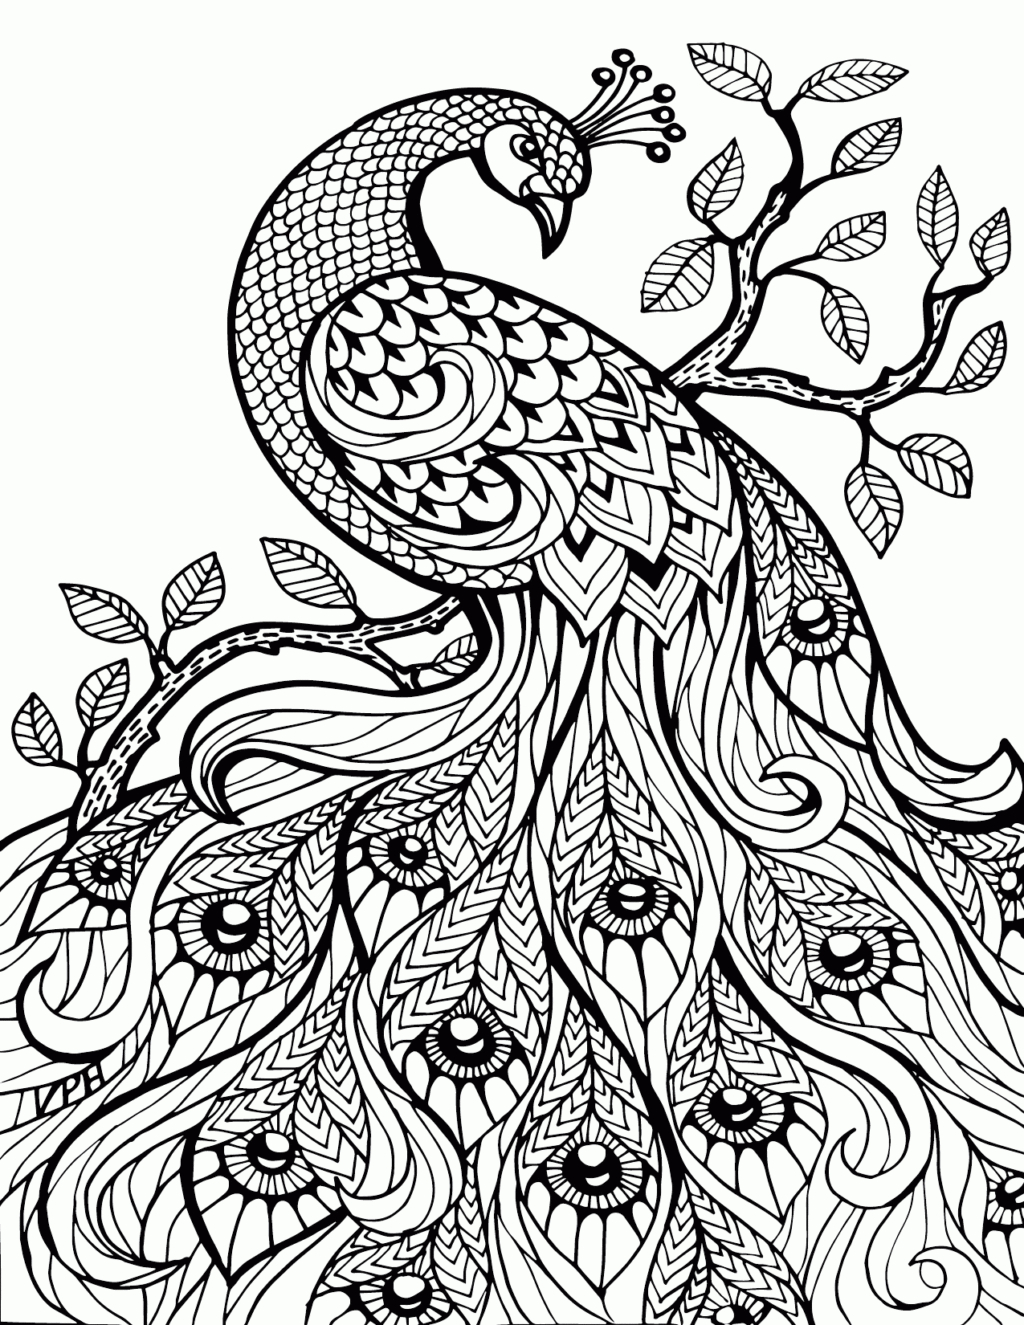 Mandala Coloring Pages Free Online Coloring Pages Free Download Mandala Coloring Pages For Adults